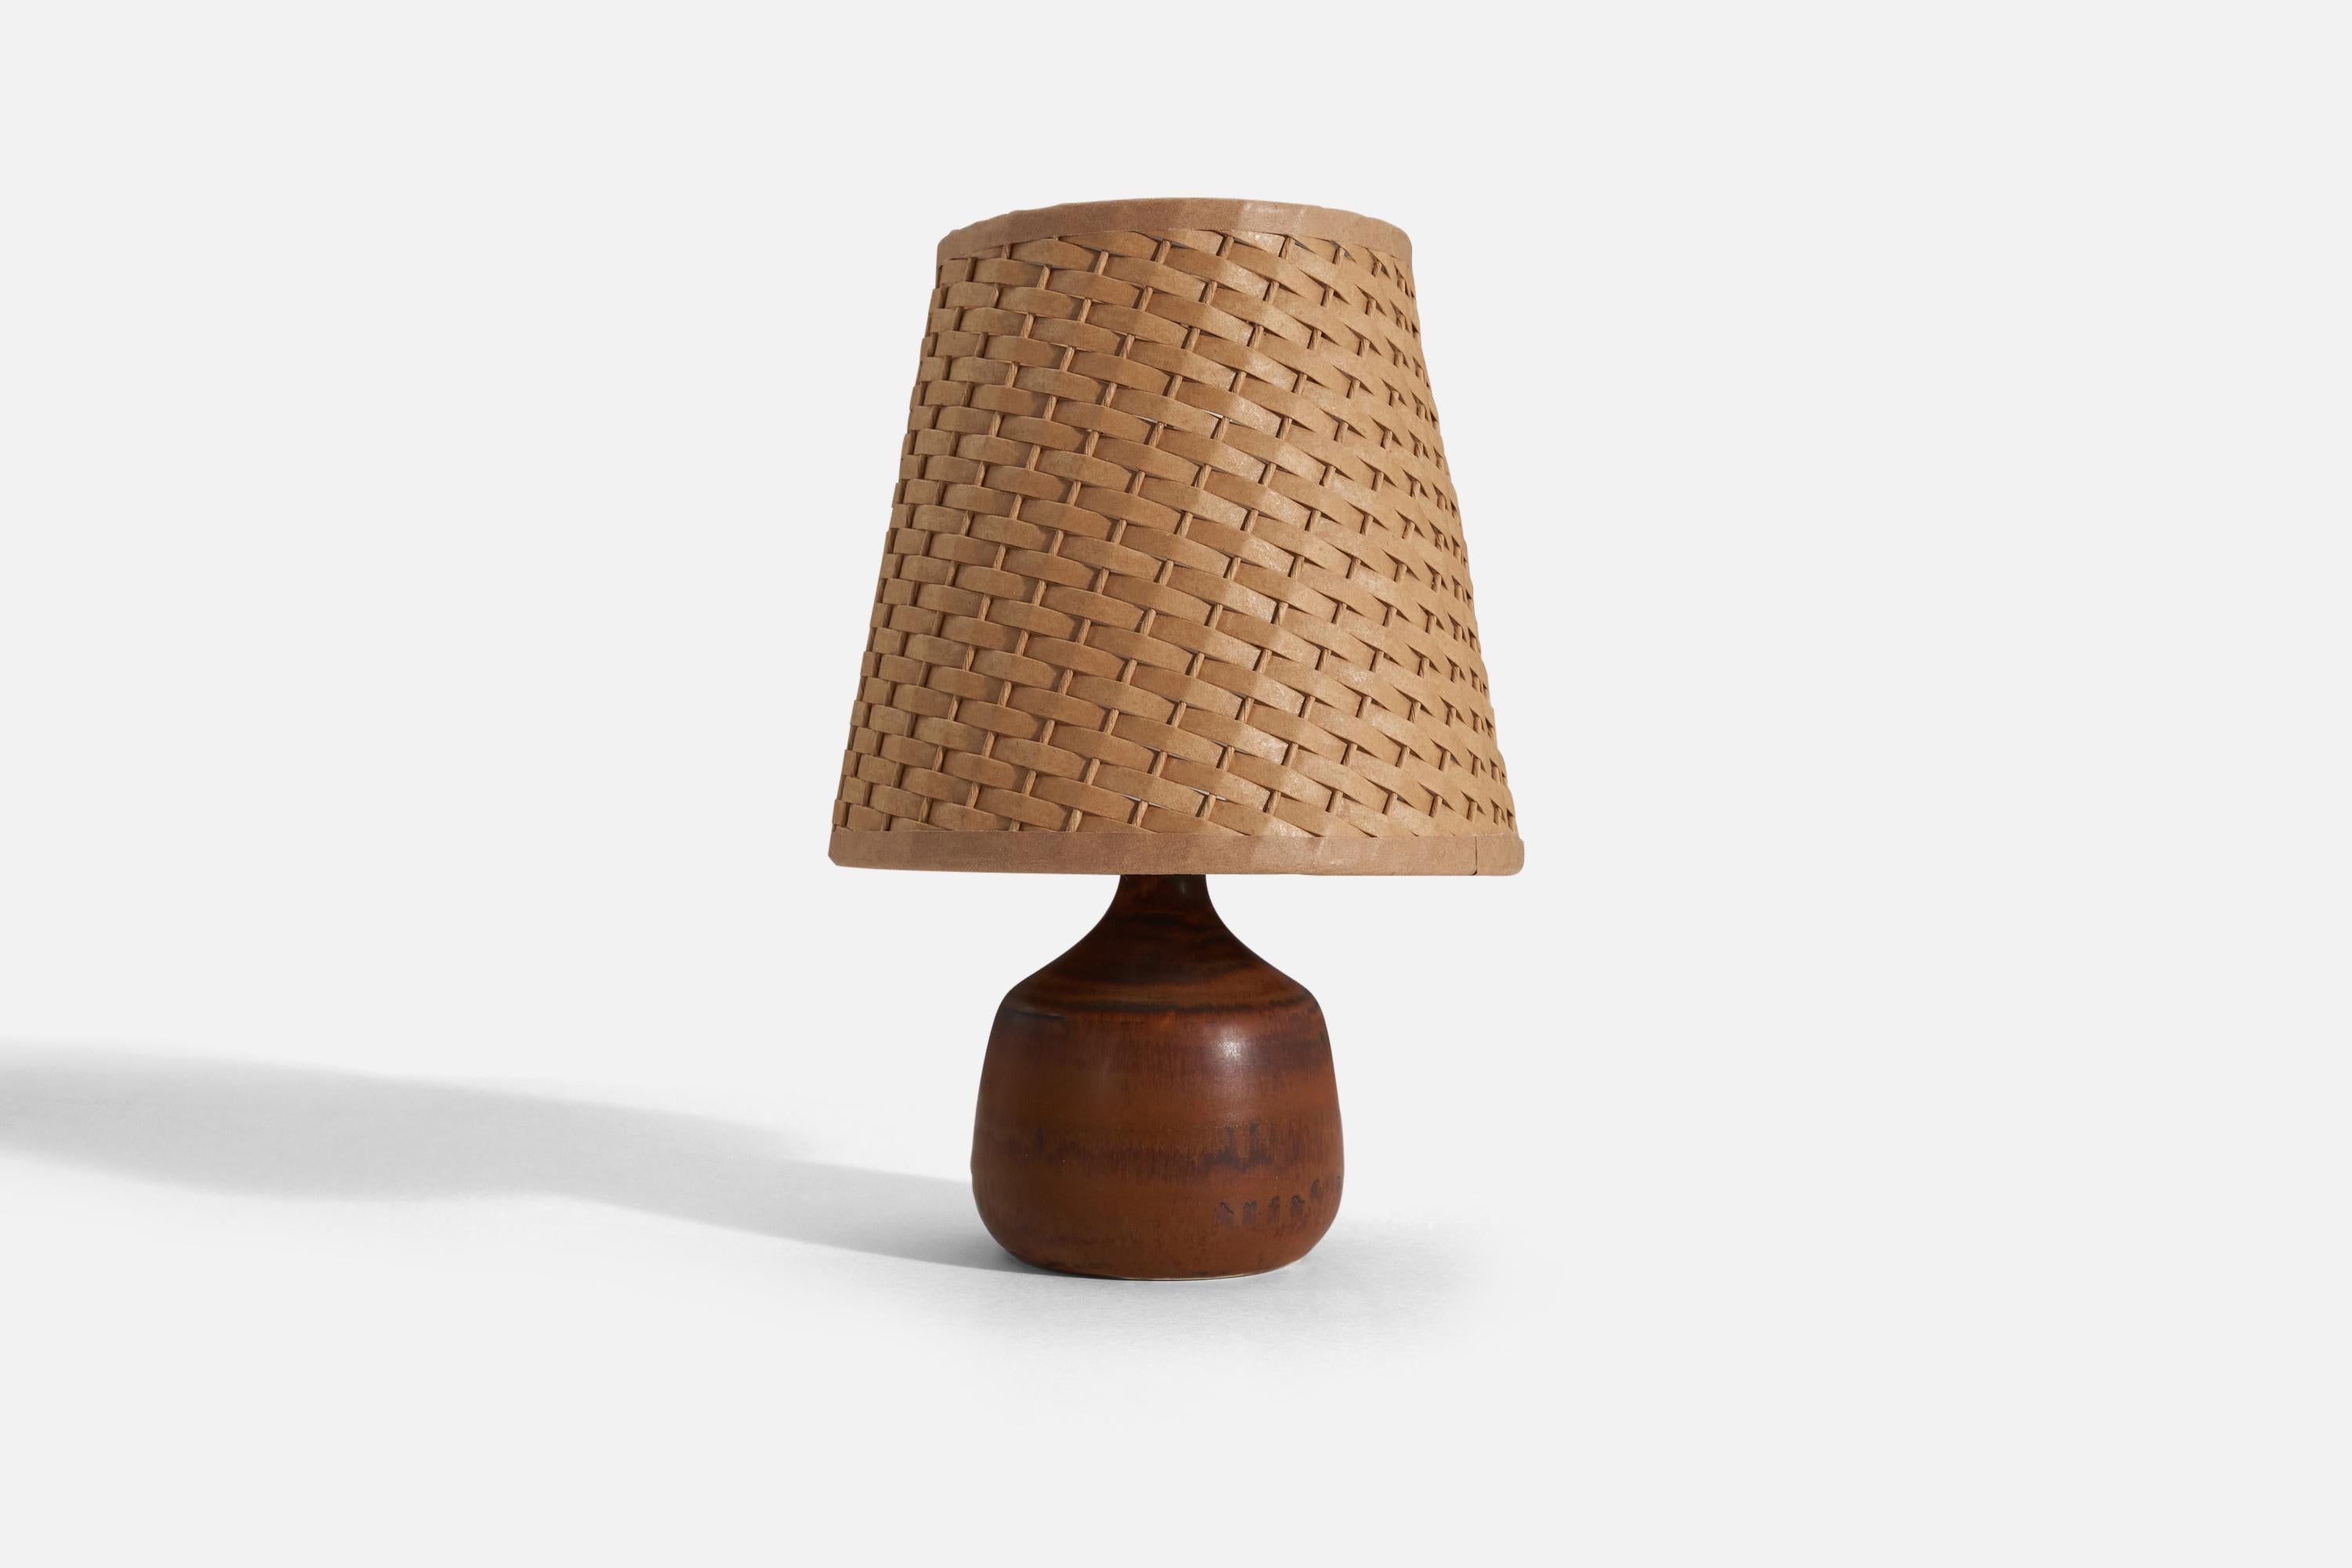 A brown-glazed stoneware table lamp designed by Gunnar Borg for Höganäs, Sweden, 1960s. 

Stated dimensions exclude lampshade, upon request illustrated lampshade can be included in purchase.
For reference:
Dimensions of shade : 4.25 x 6 x 5.75